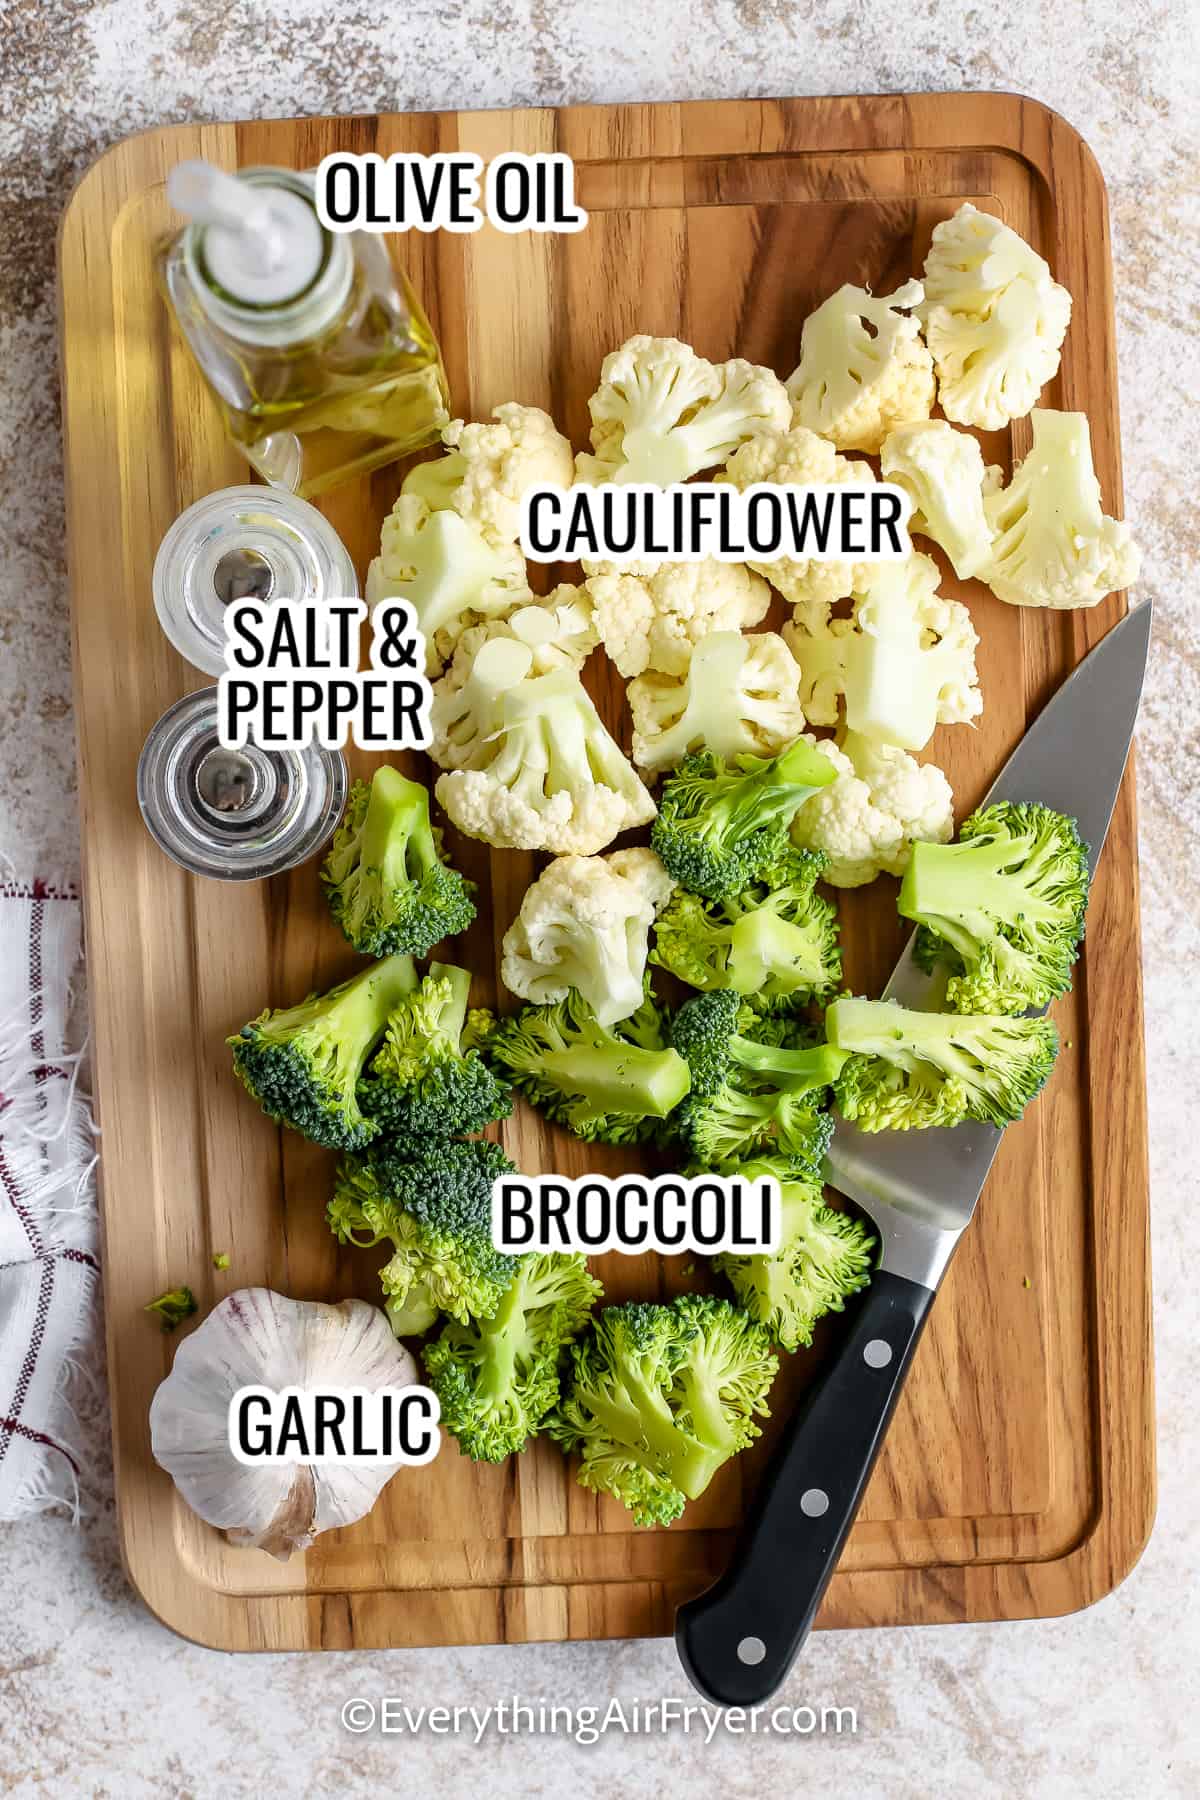 ingredients for air fryer cauliflower and broccoli, including cauliflower, broccoli, olive oil, and garlic